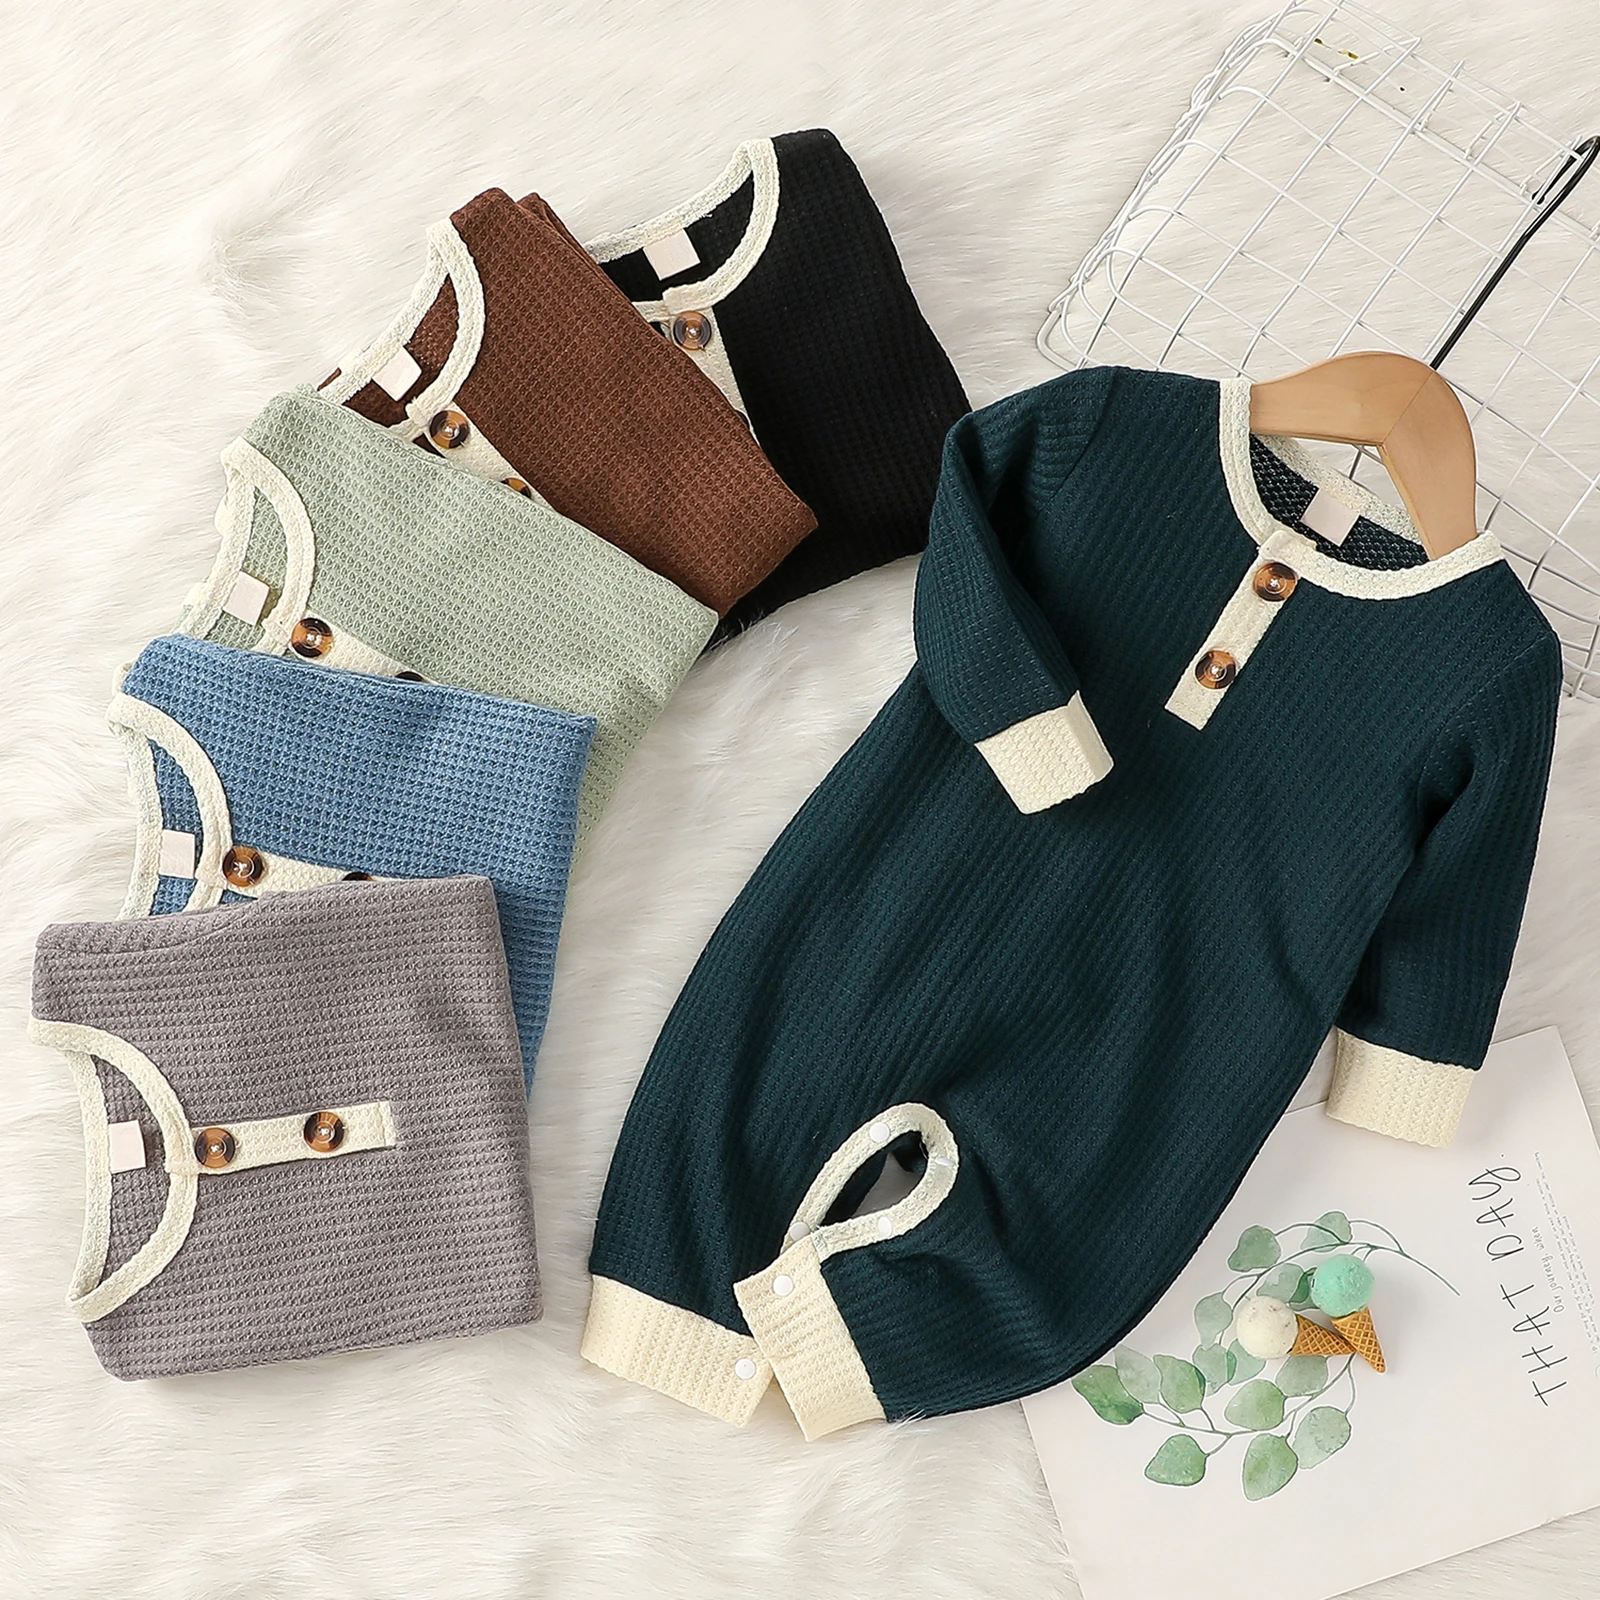 

6 Colors Newborn Baby Boys Girls Causal Jumpsuits Solid Long Sleeve Pocket Romper Overalls Outfits 0-24M 2021